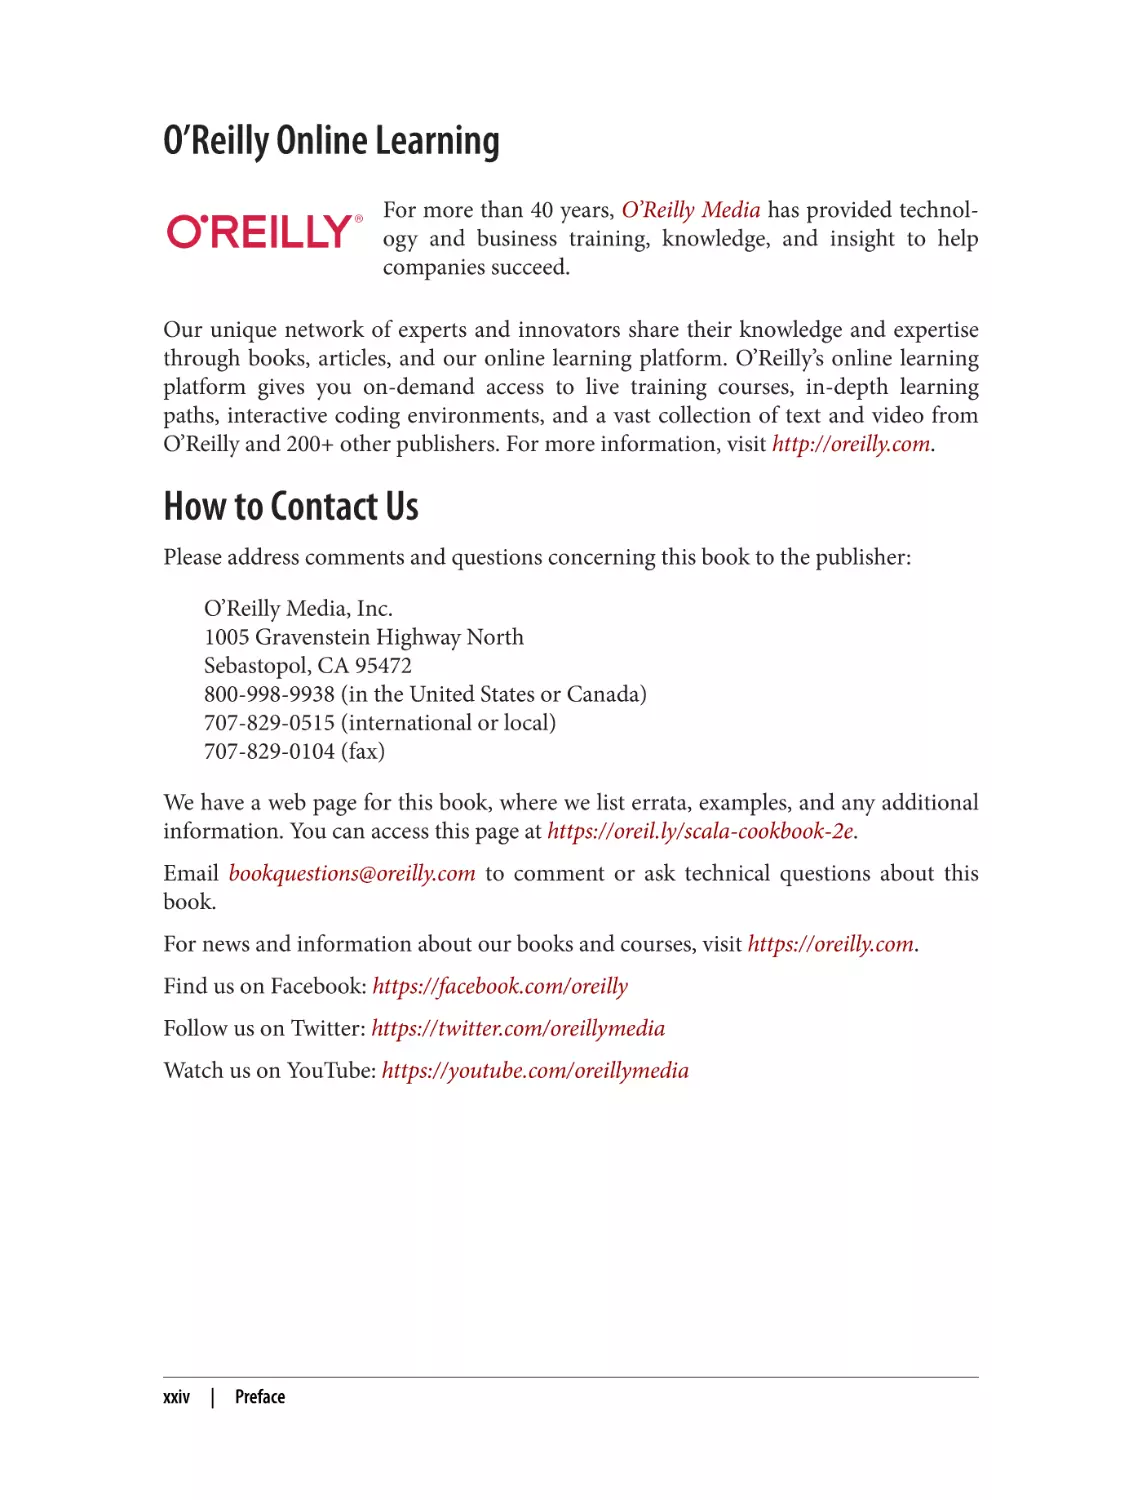 O’Reilly Online Learning
How to Contact Us